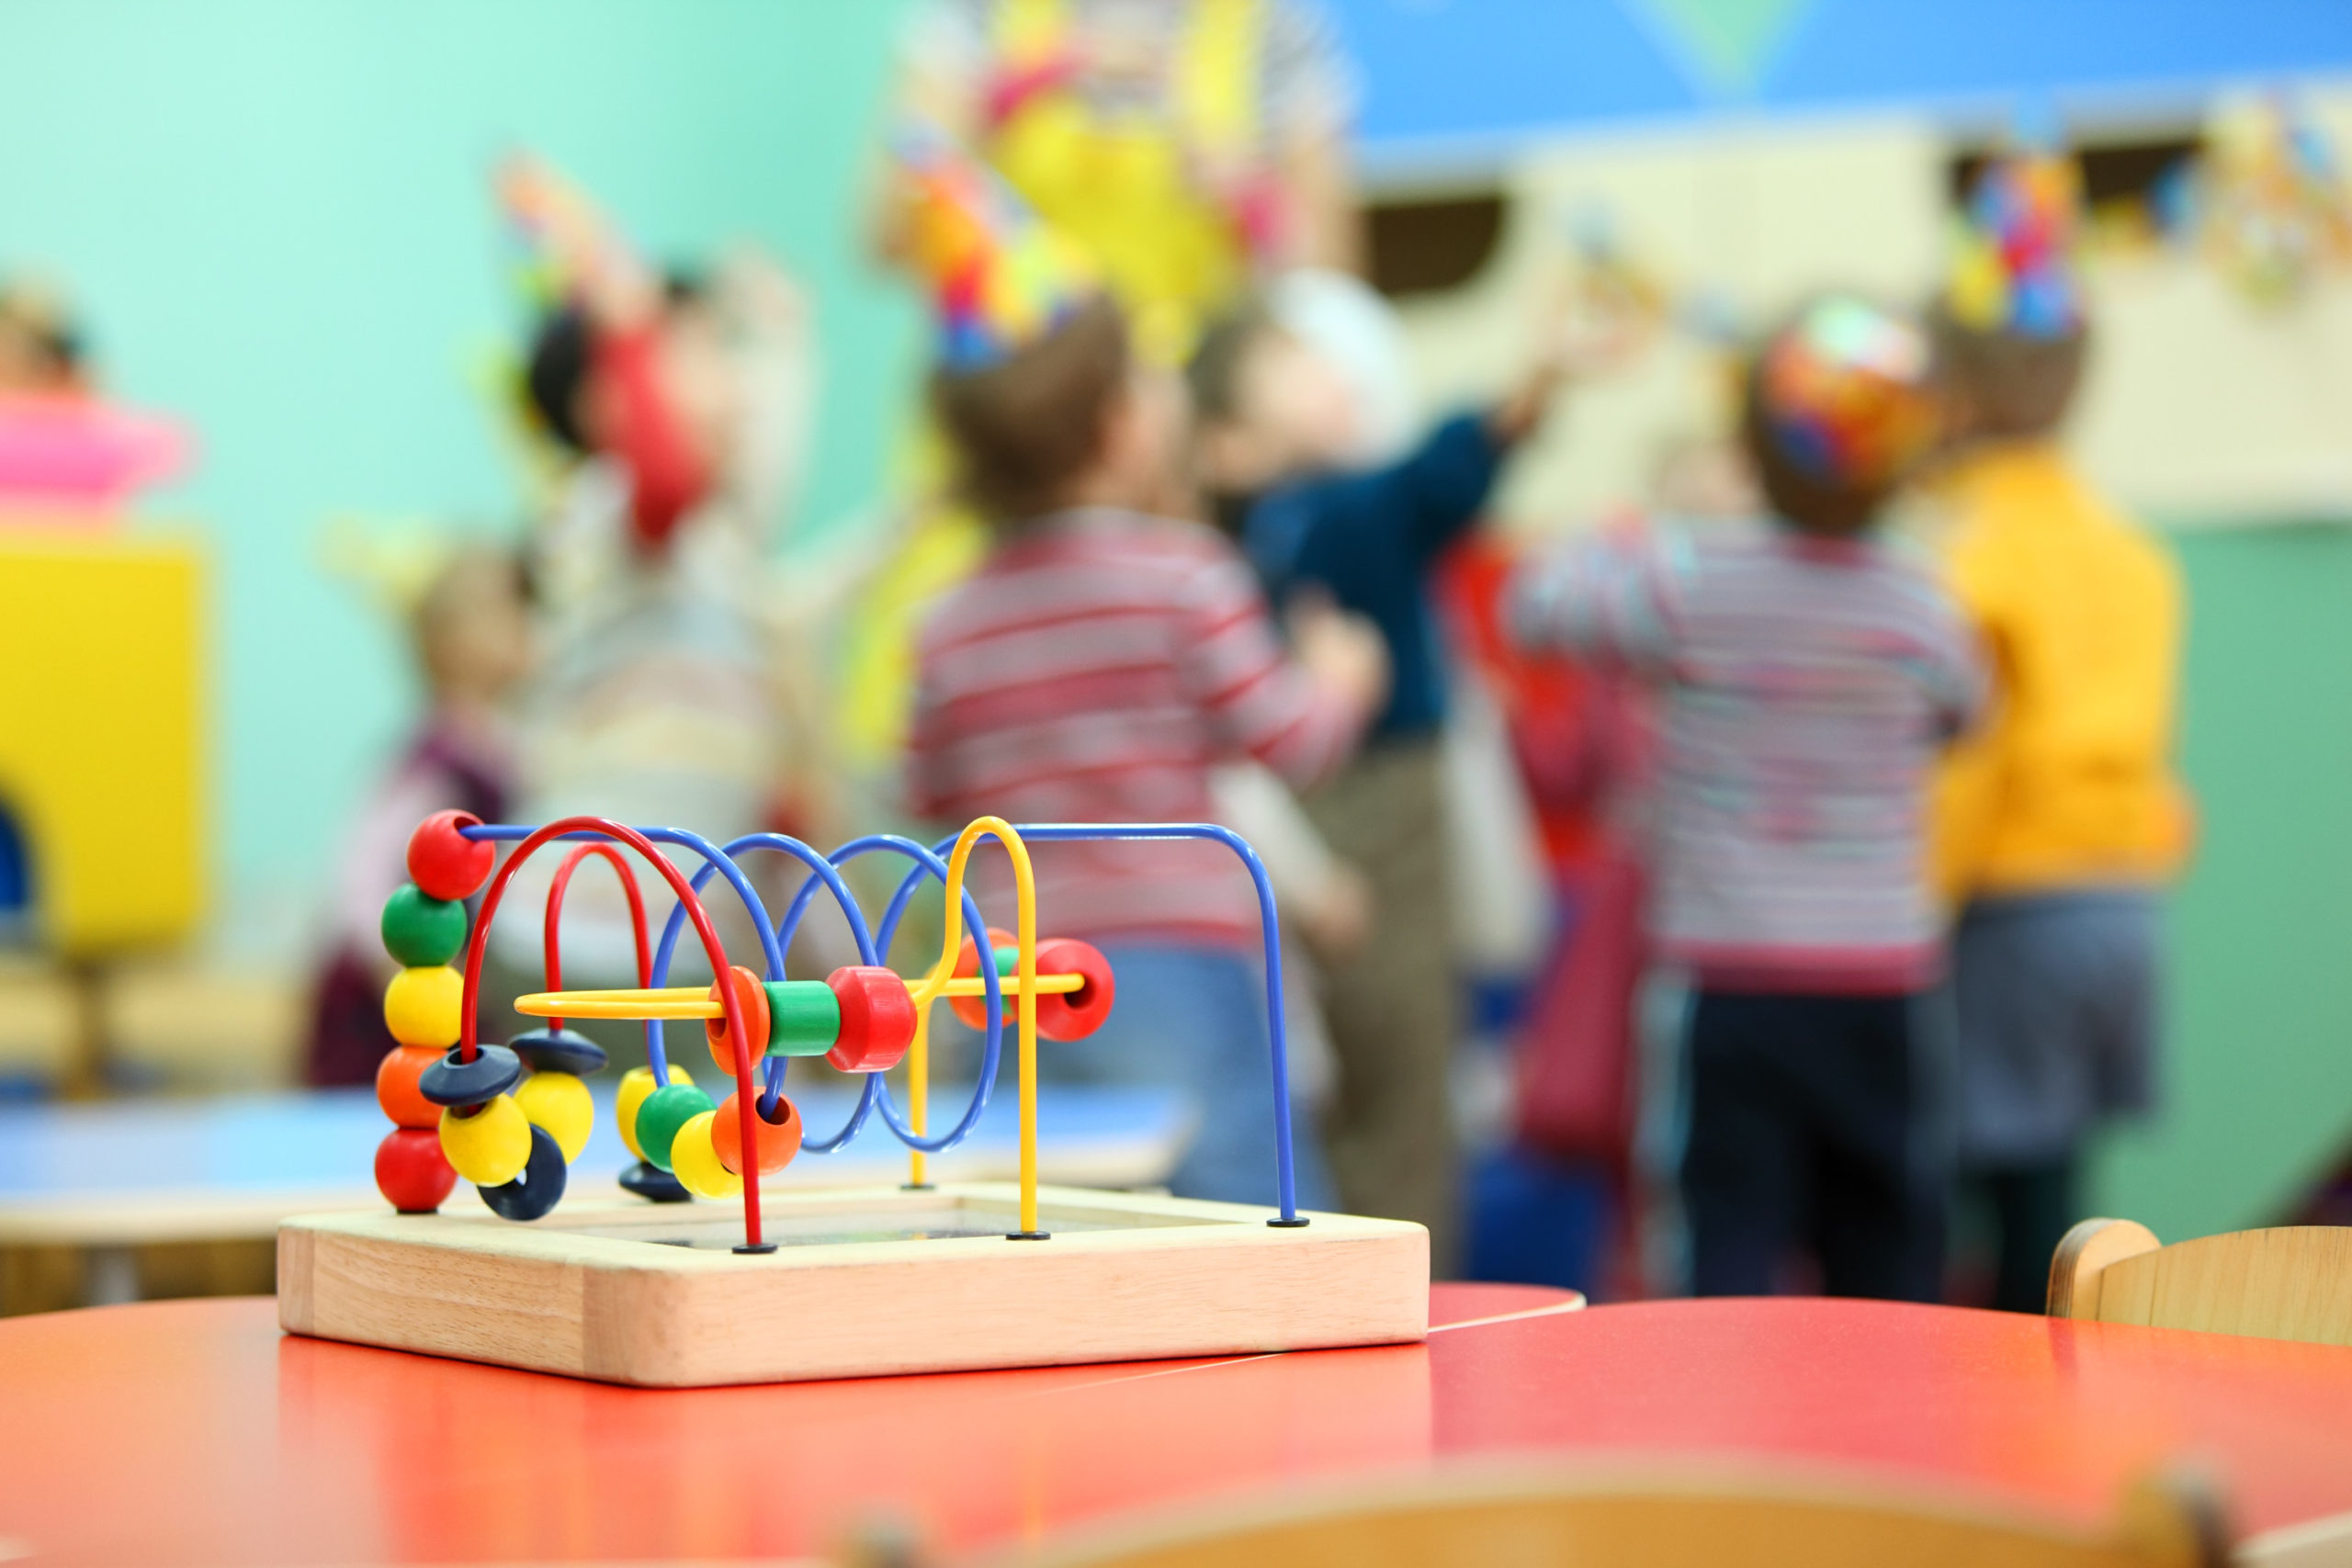 What to Look for When Visiting a Childcare Center or Preschool